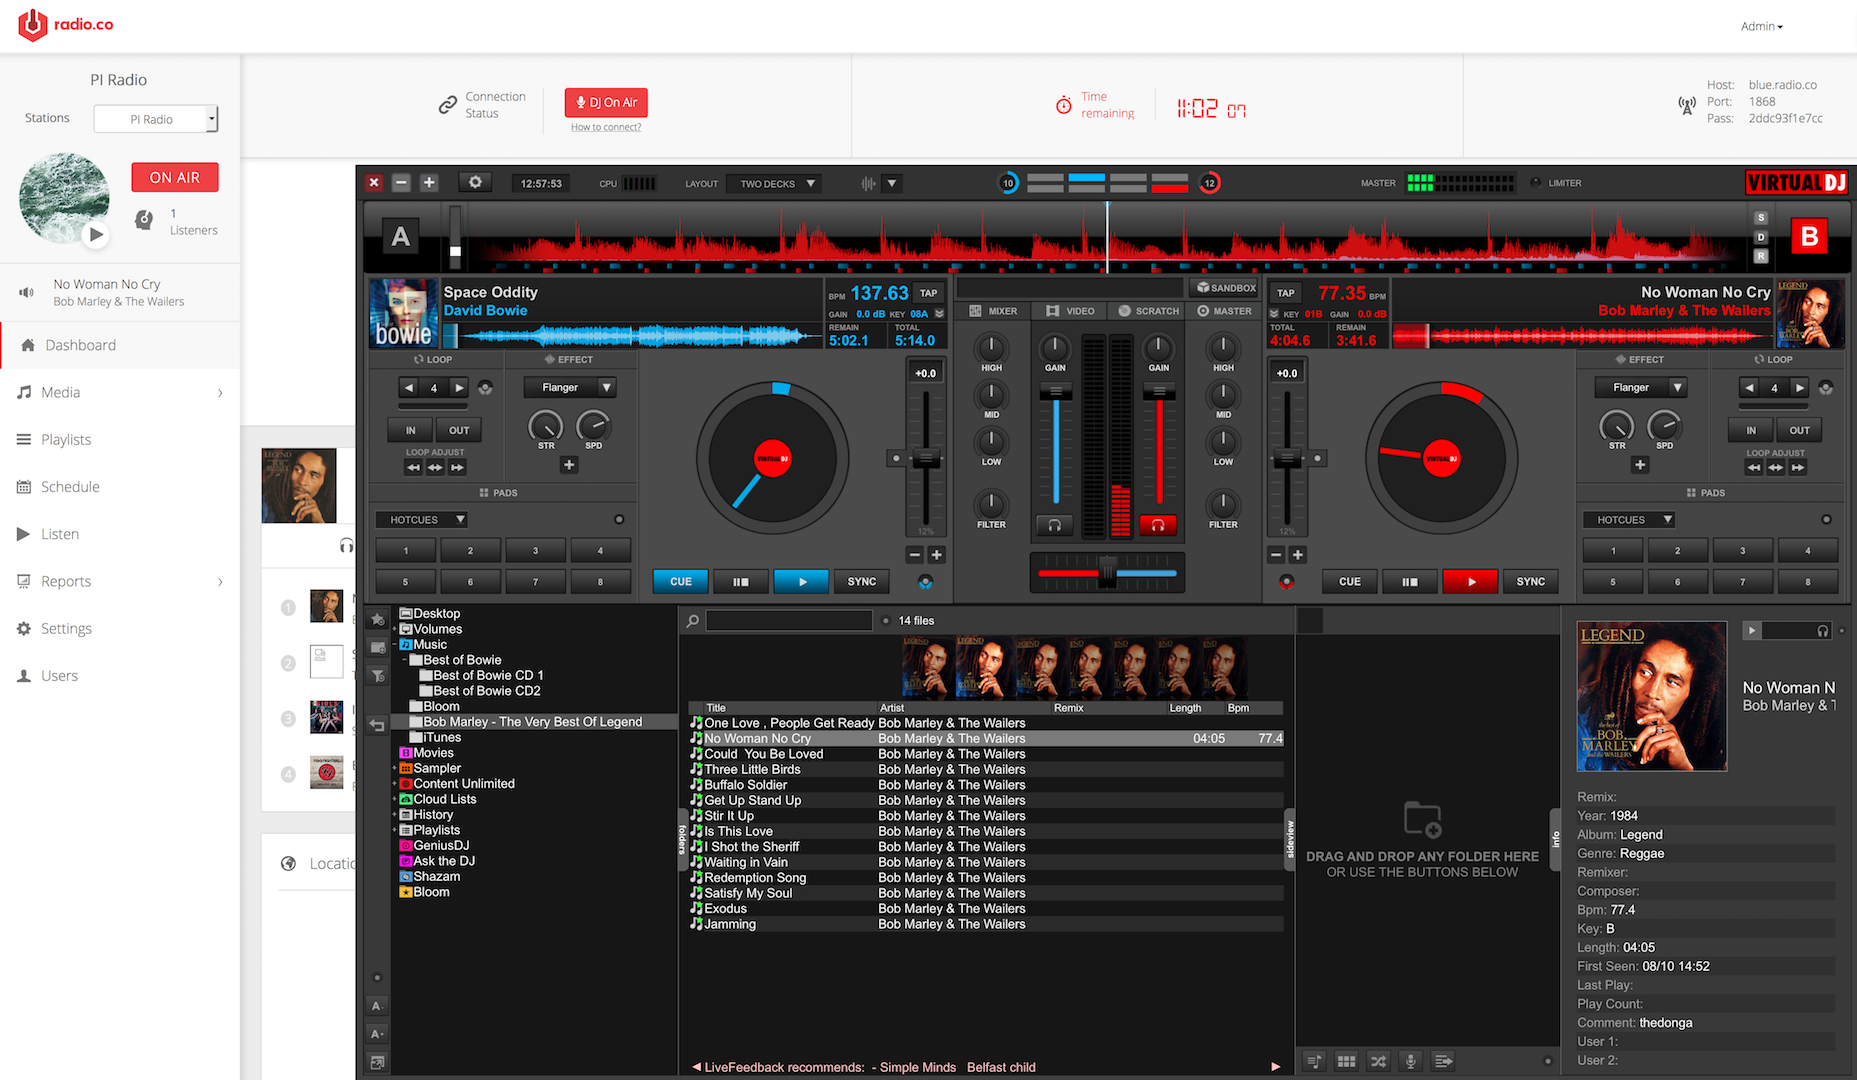 Virtual DJ 8 Connected to Radio.co